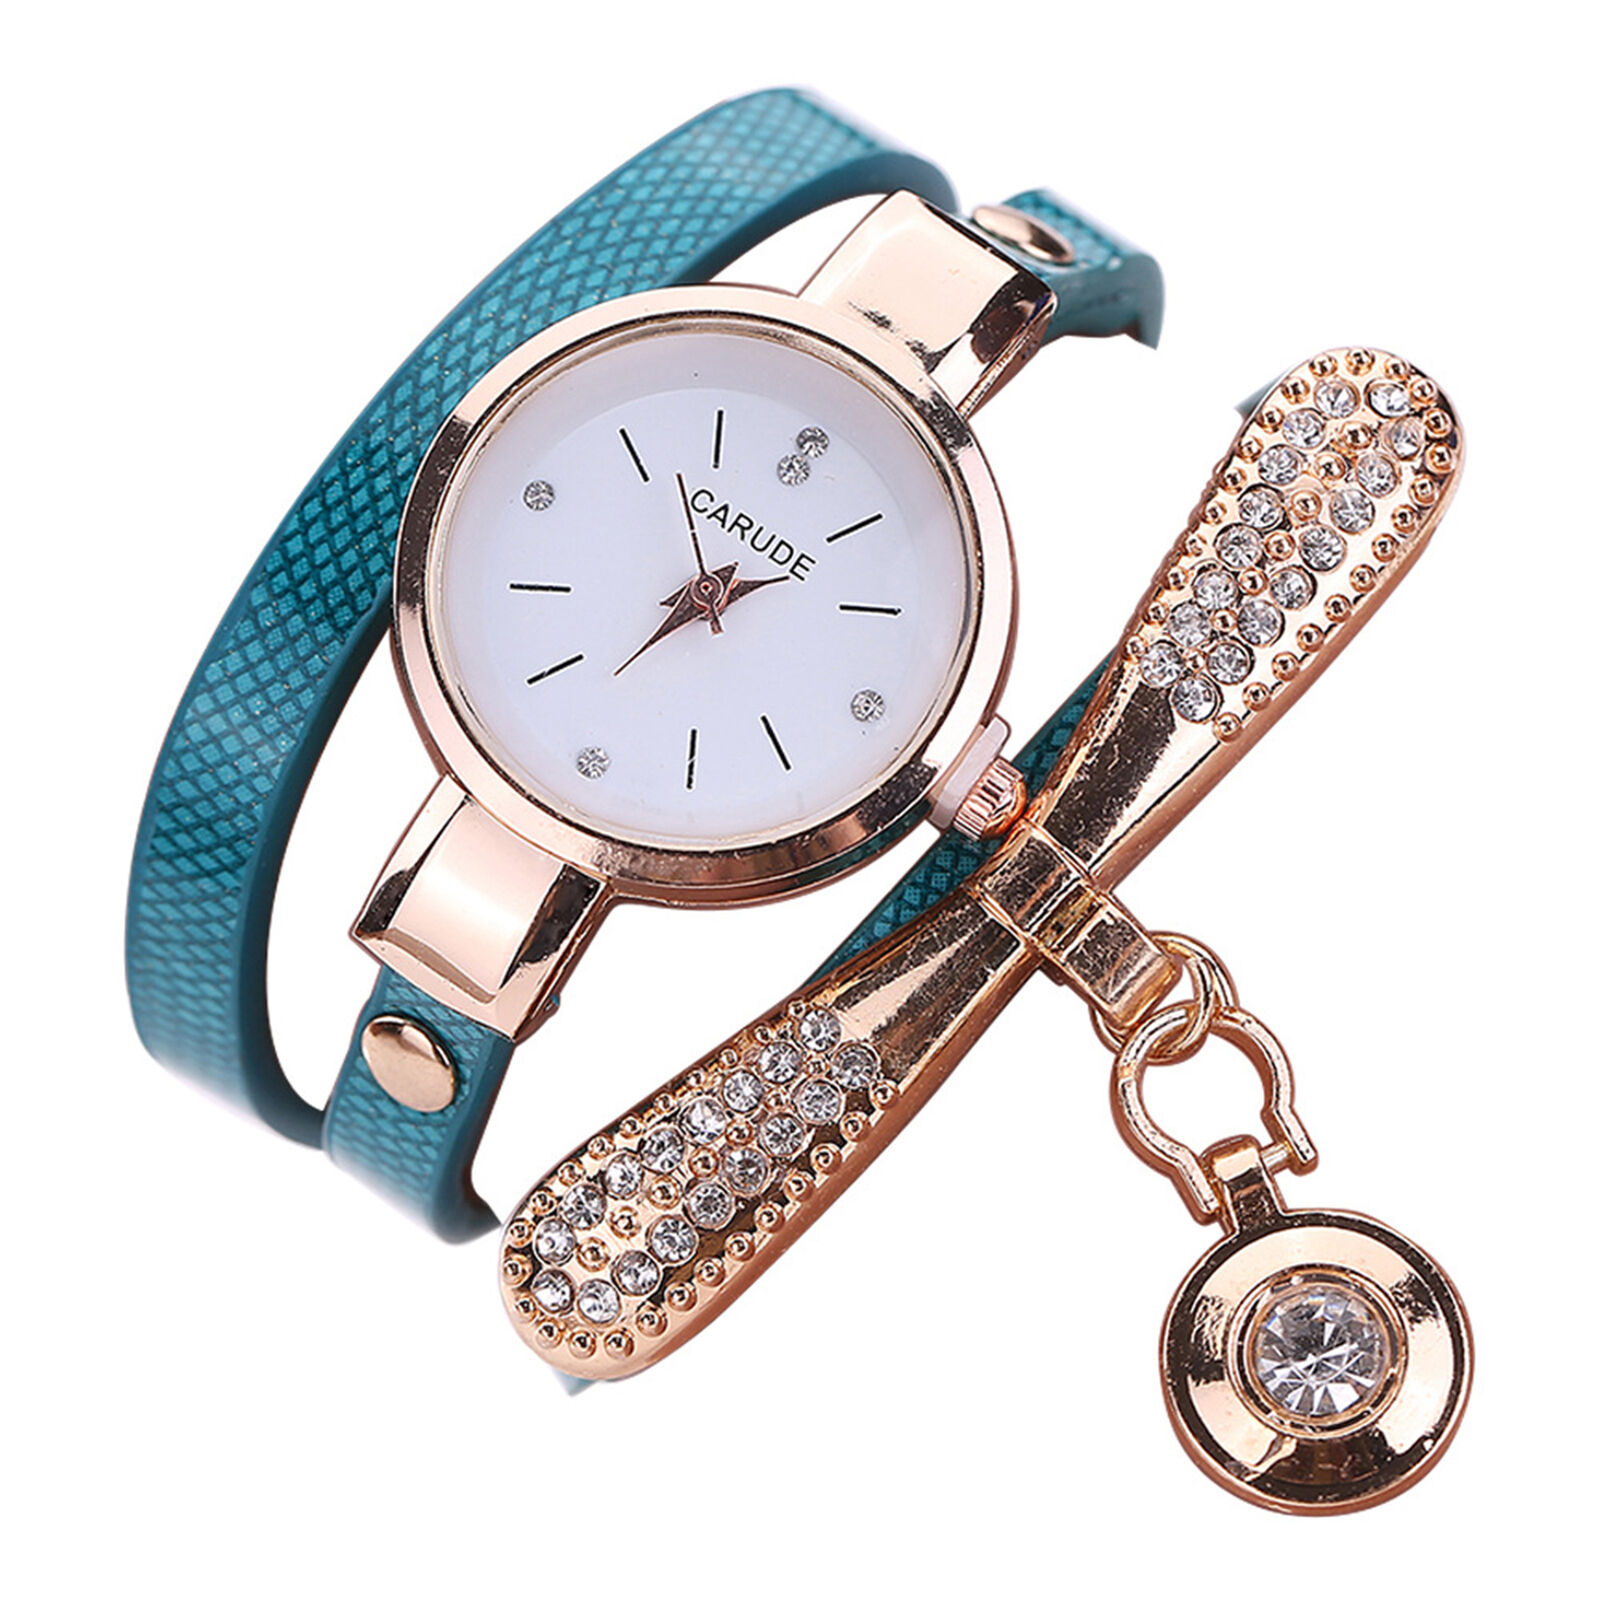 Watch Unique Faux Leather Band Rhinestone Round Dial Quartz Watch Delicate Unbranded